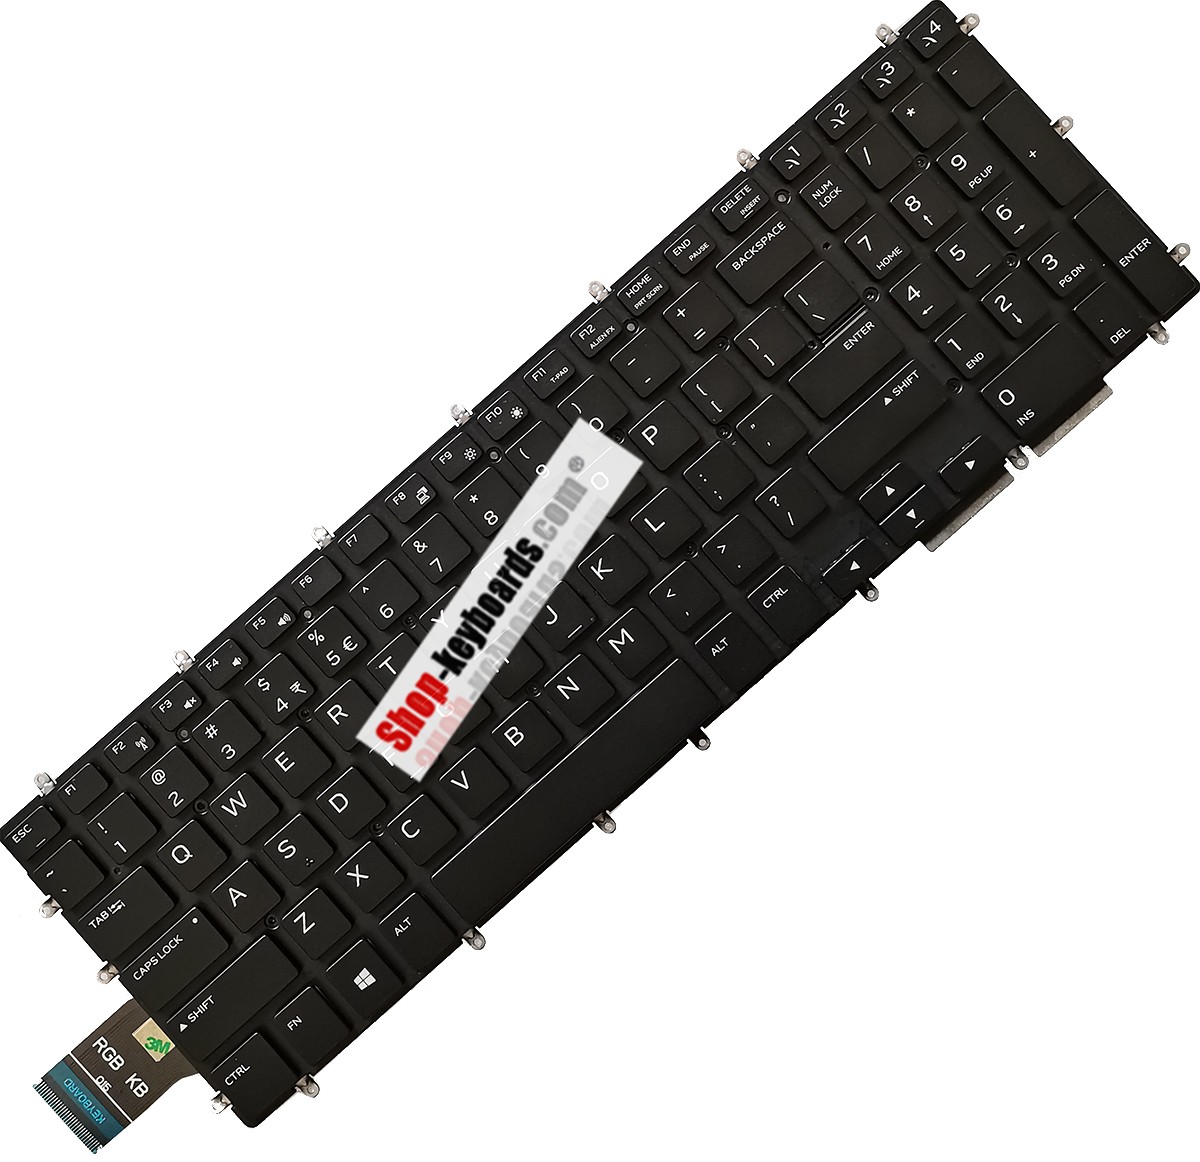 Dell 0KN4-0D1FR16 Keyboard replacement